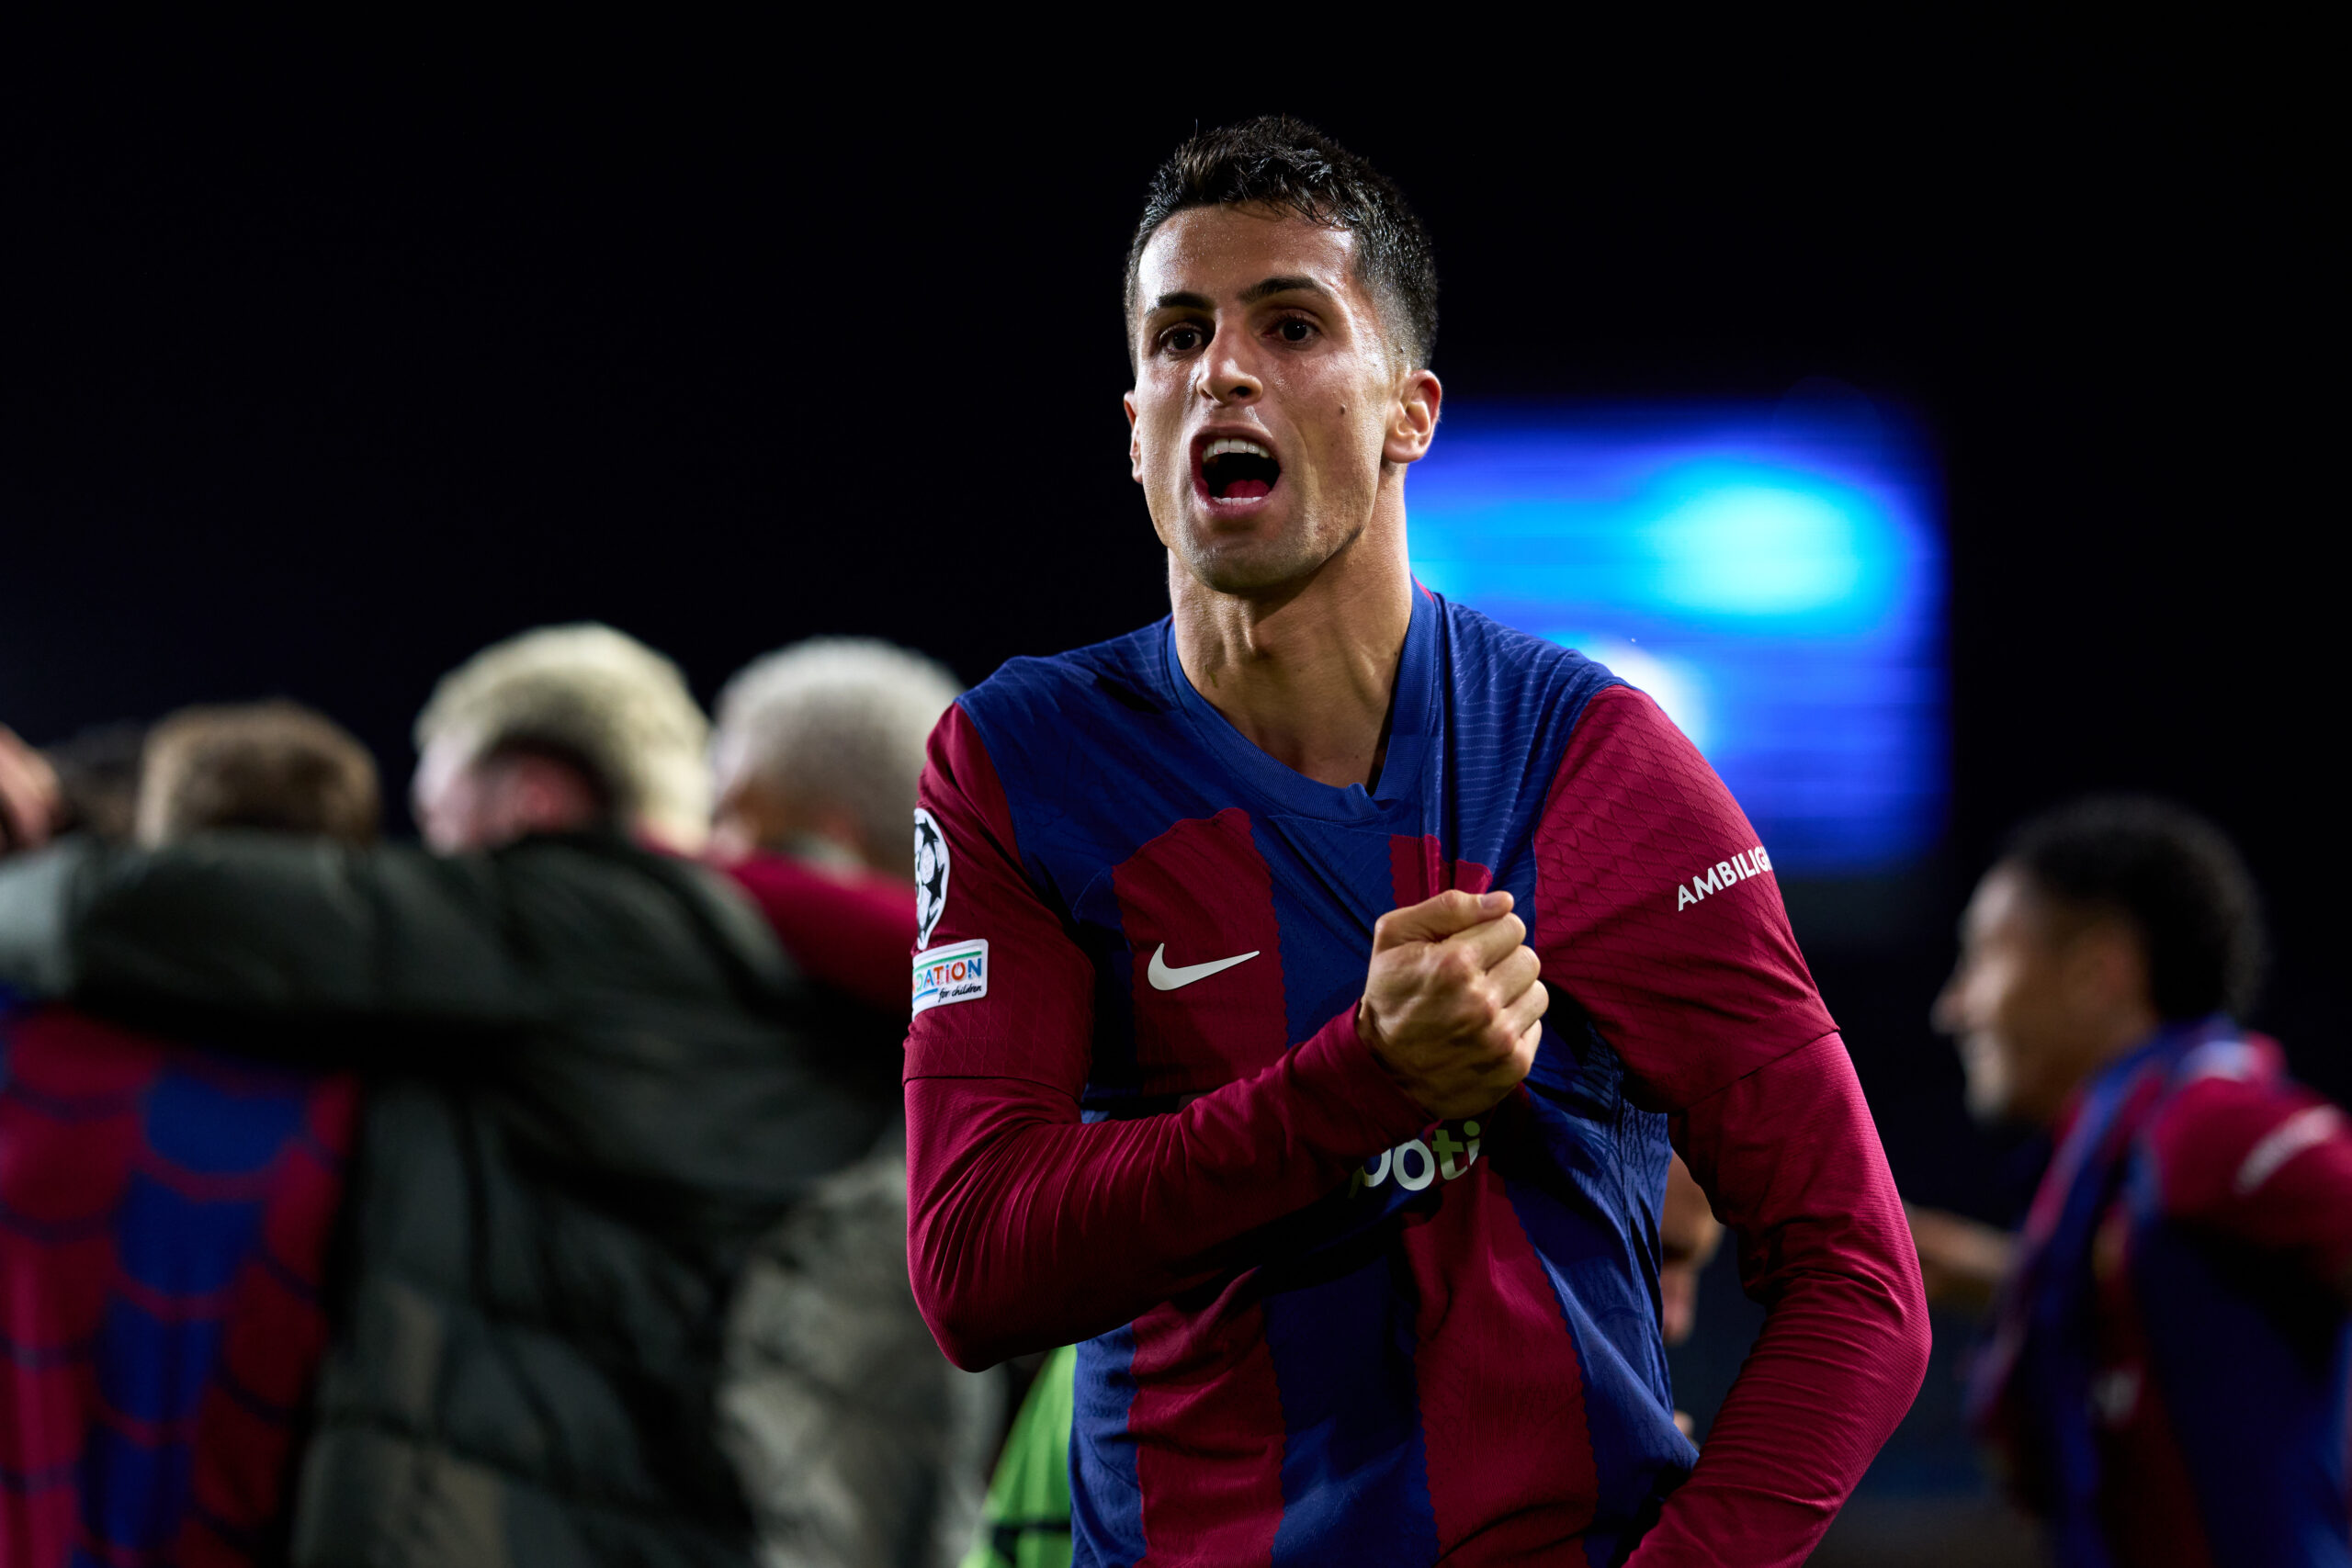 BARCELONA, SPAIN - MARCH 12: Joao Cancelo of FC Barcelona celebrates after his teammate Robert Lewandowski (not pictured) scored their team's third goal during the UEFA Champions League 2023/24 round of 16 second leg match between FC Barcelona and SSC Napoli at Estadi Olimpic Lluis Companys on March 12, 2024 in Barcelona, Spain.